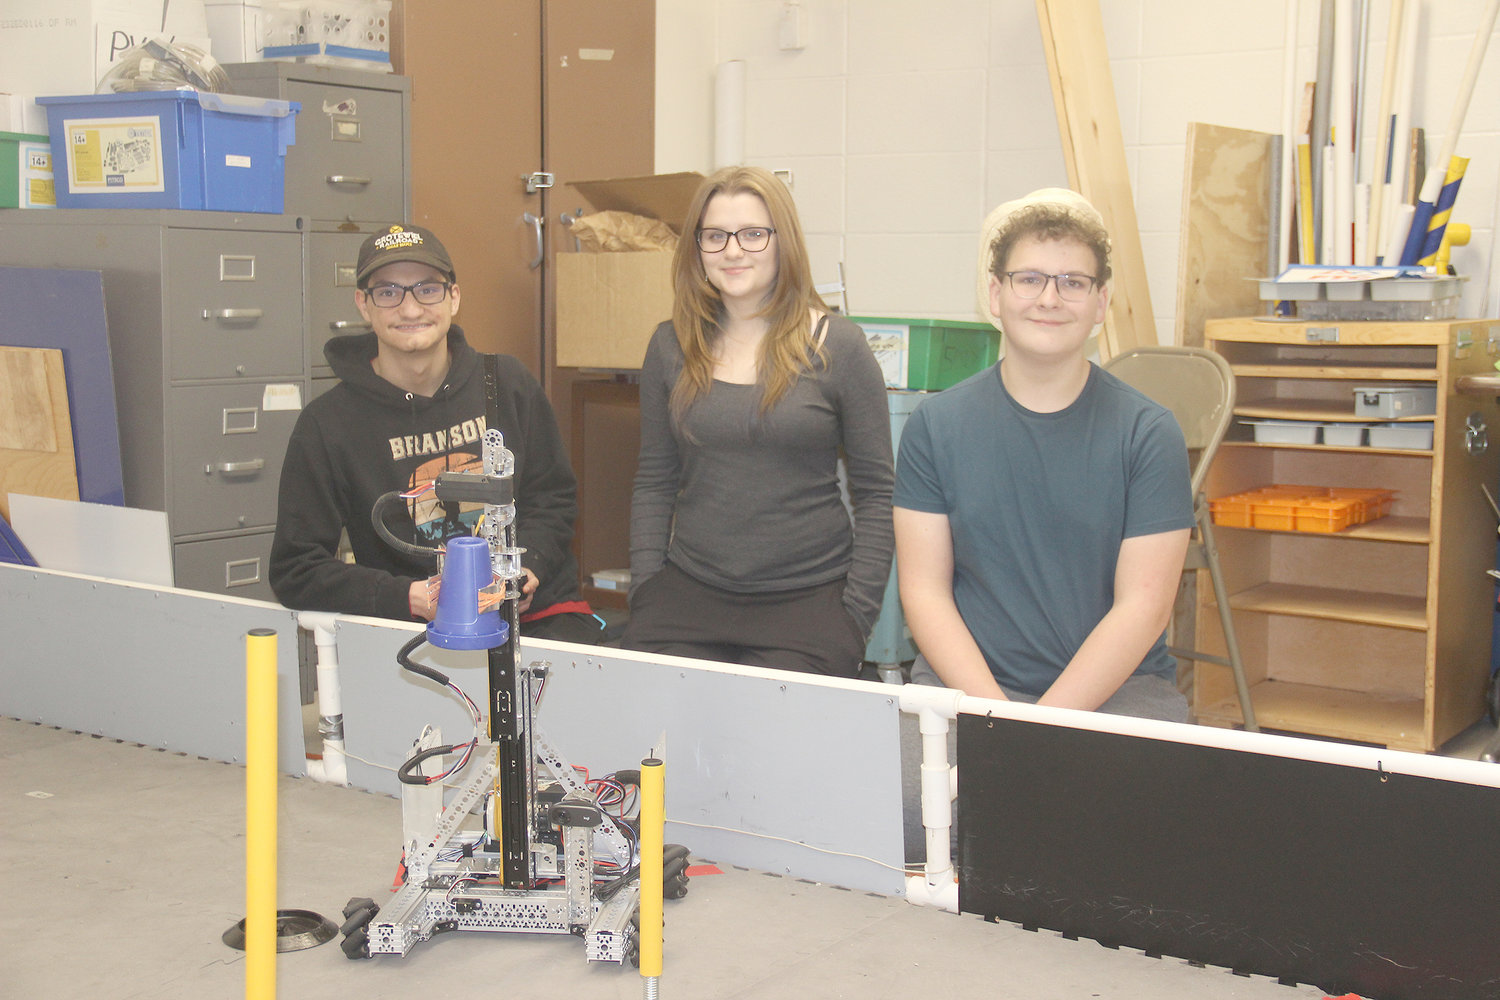 ROBOTICS TEAM — Sophomores Chase Grotewiel, Carlee Grueneberg and Luke Gens display their custom-built robot in a practice area at Wright City High School. Not pictured: sophomores Bee Padgett and Theory Ames.